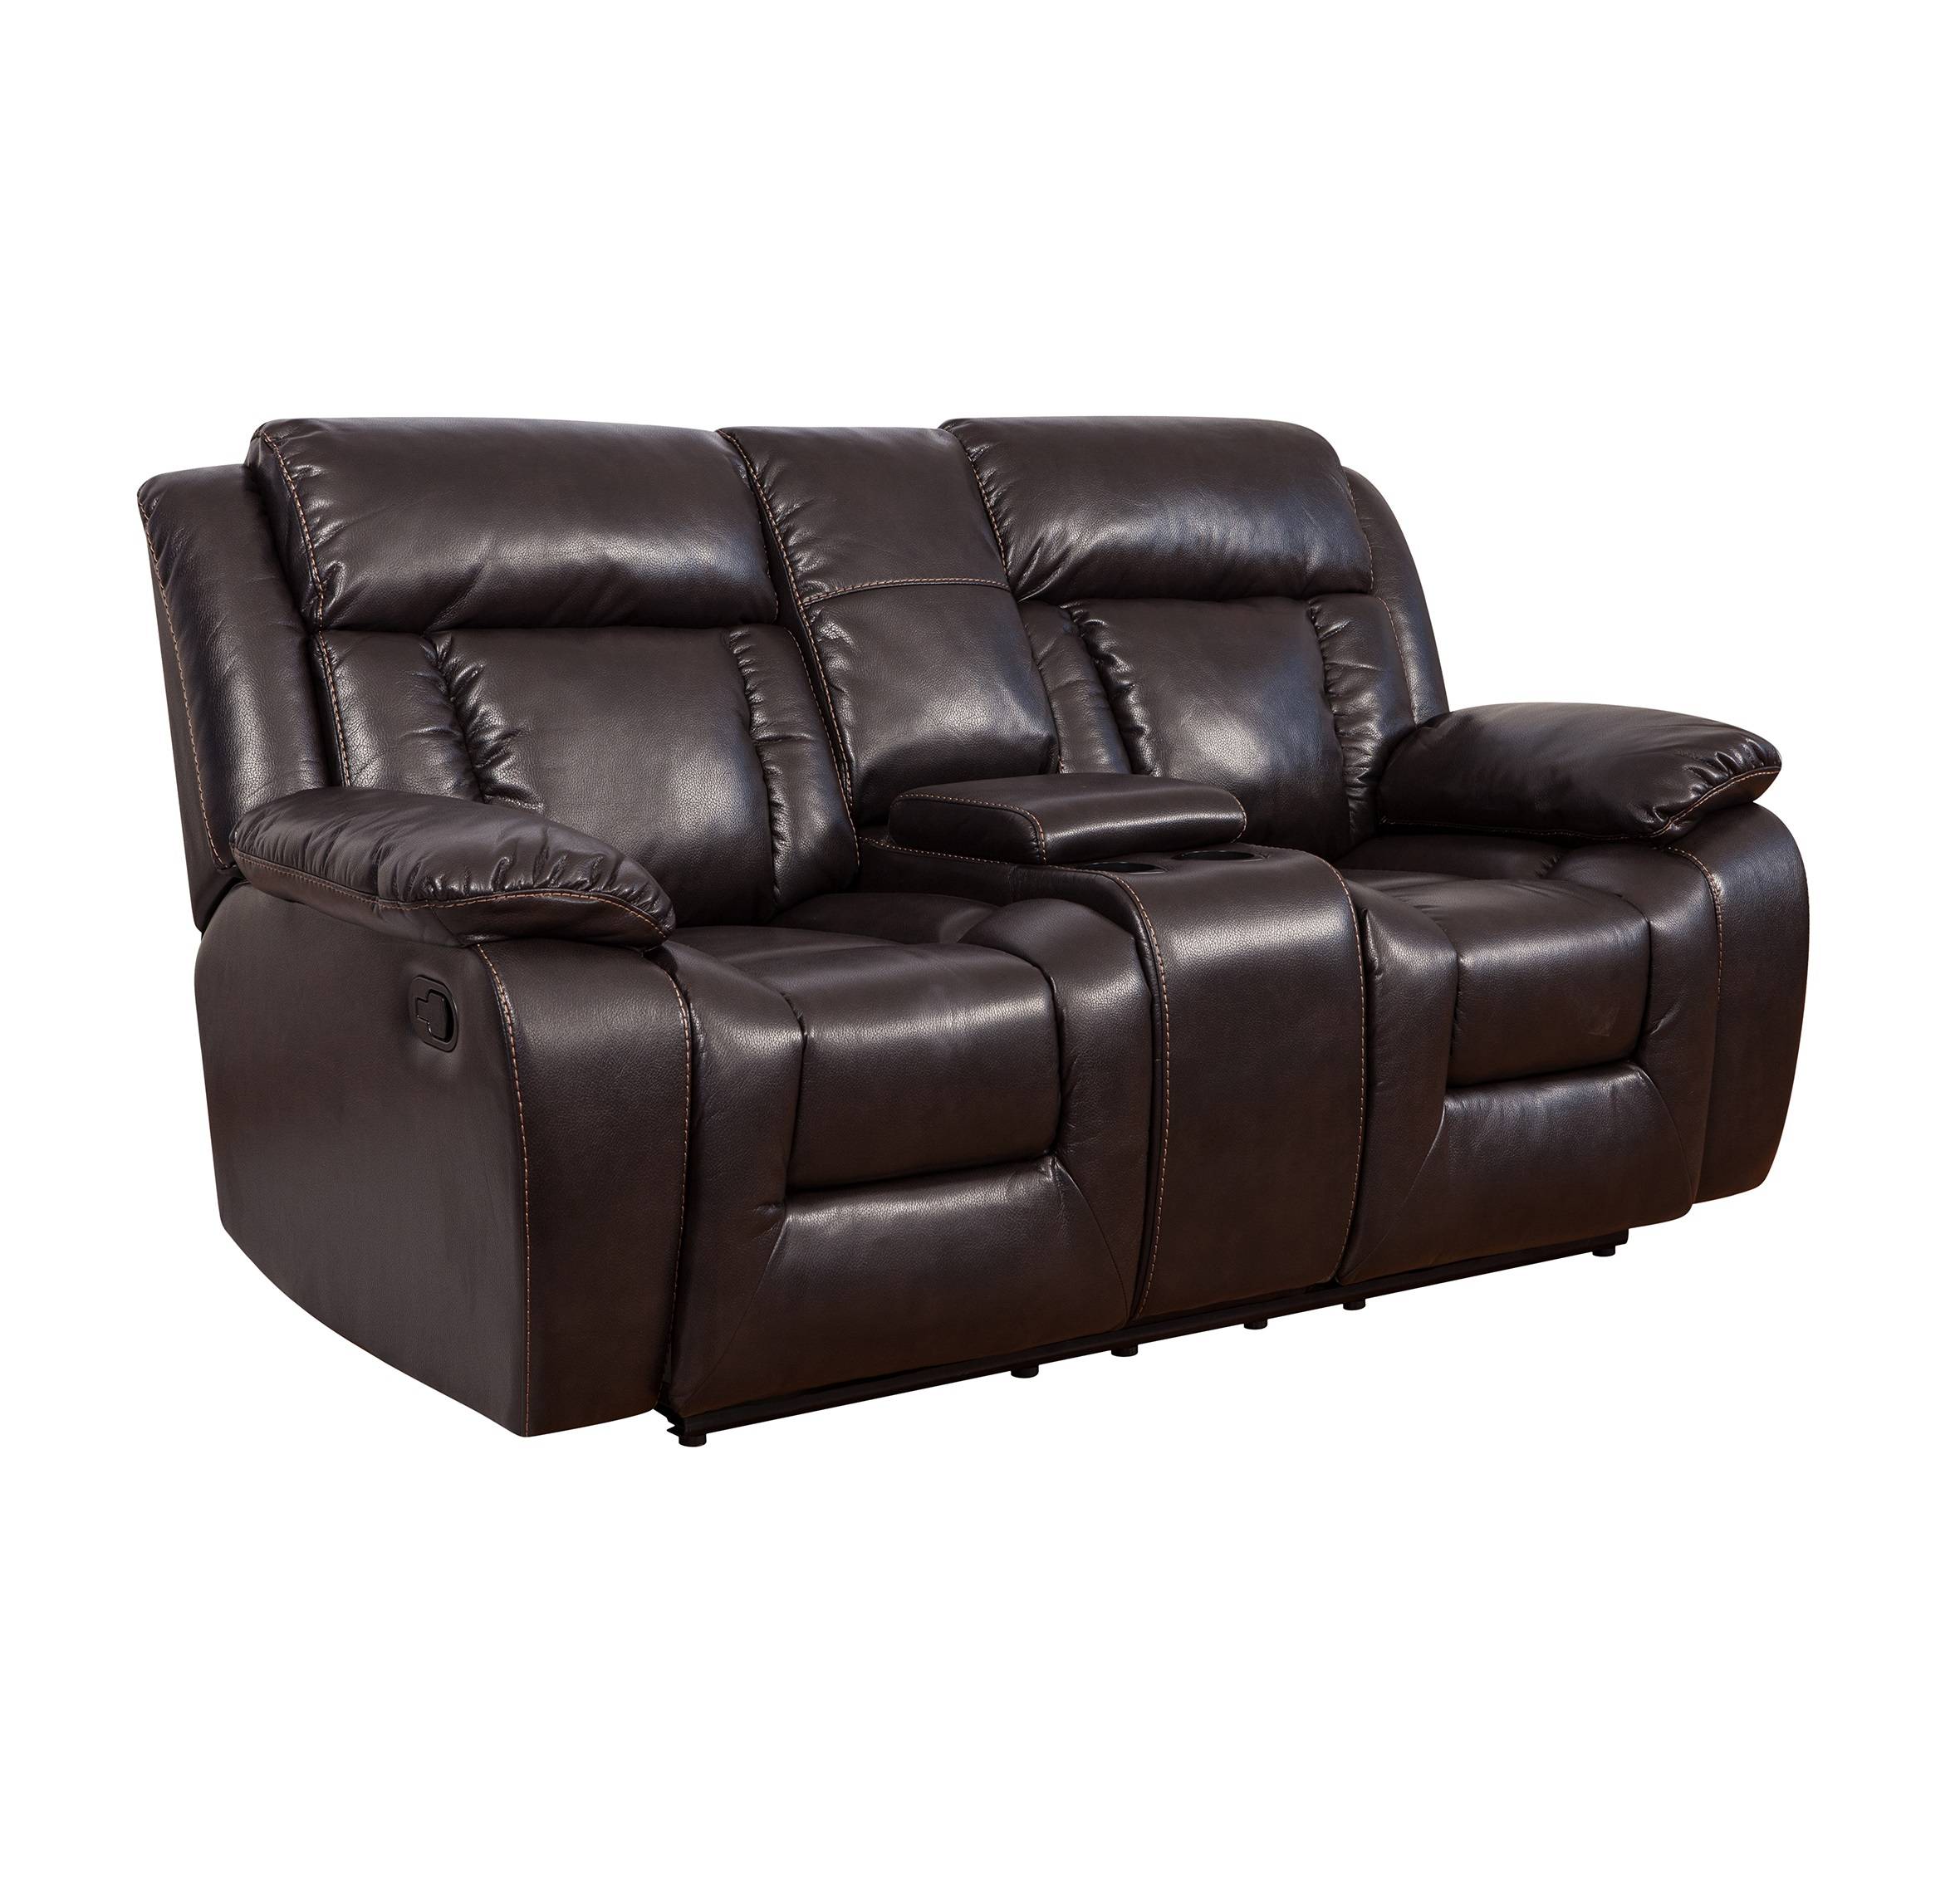 High Quality for Sectional Fabric Recliner Sofa - American style 2 seater modern leather loveseat with cup holder – Chuan Yang